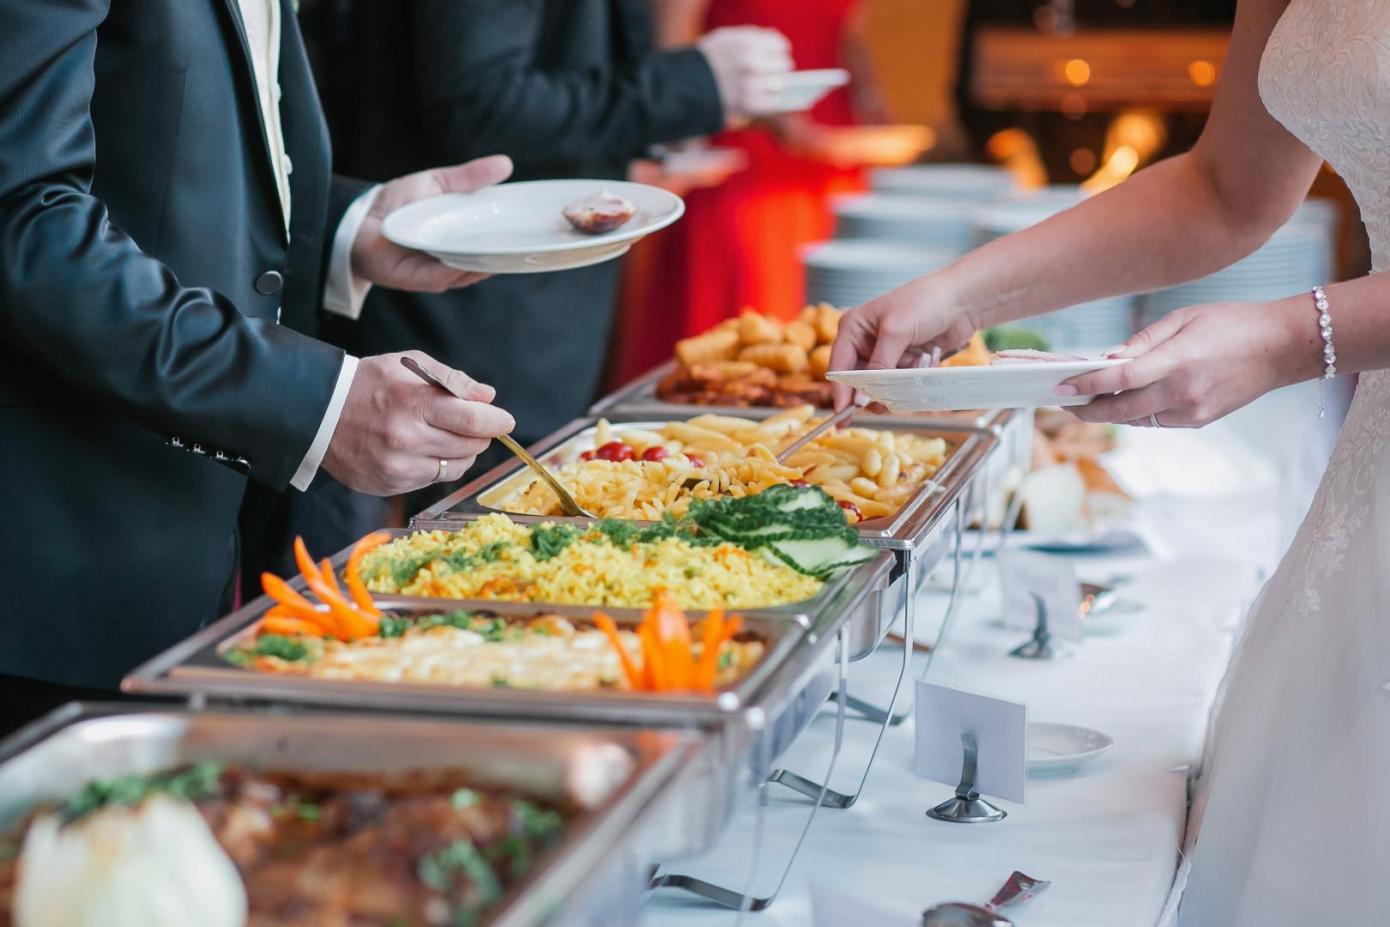 What Are the Etiquette Guidelines for Serving and Consuming Food at an Event?